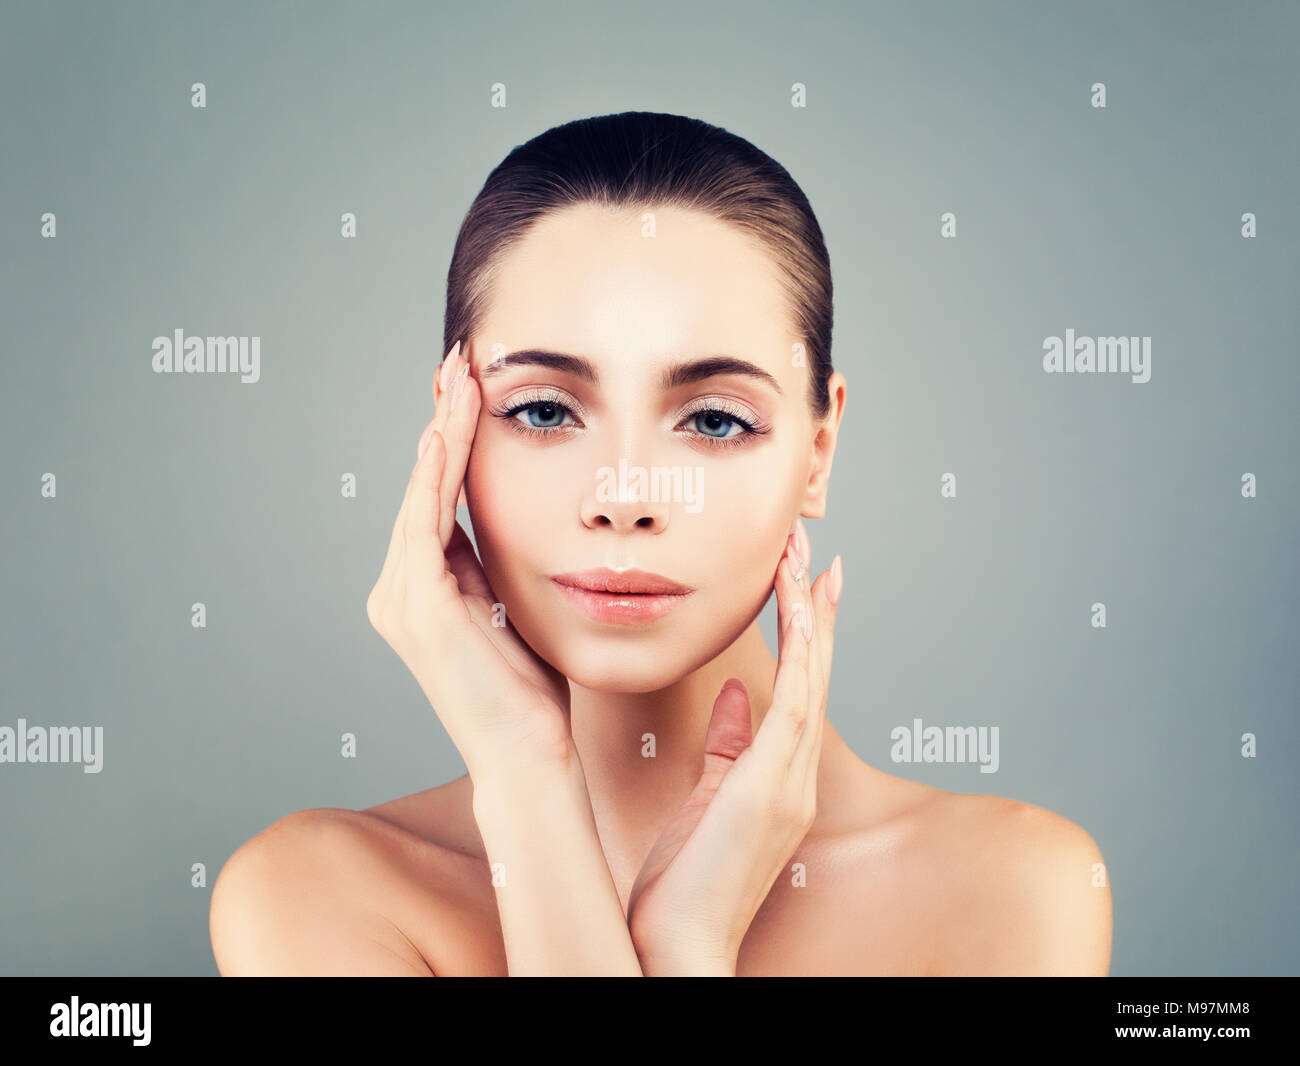 Beauty Spa Woman Portrait. Beautiful Girl Touching her Face, Skincare, Facial Treatment and Cosmetology Concept Stock Photo